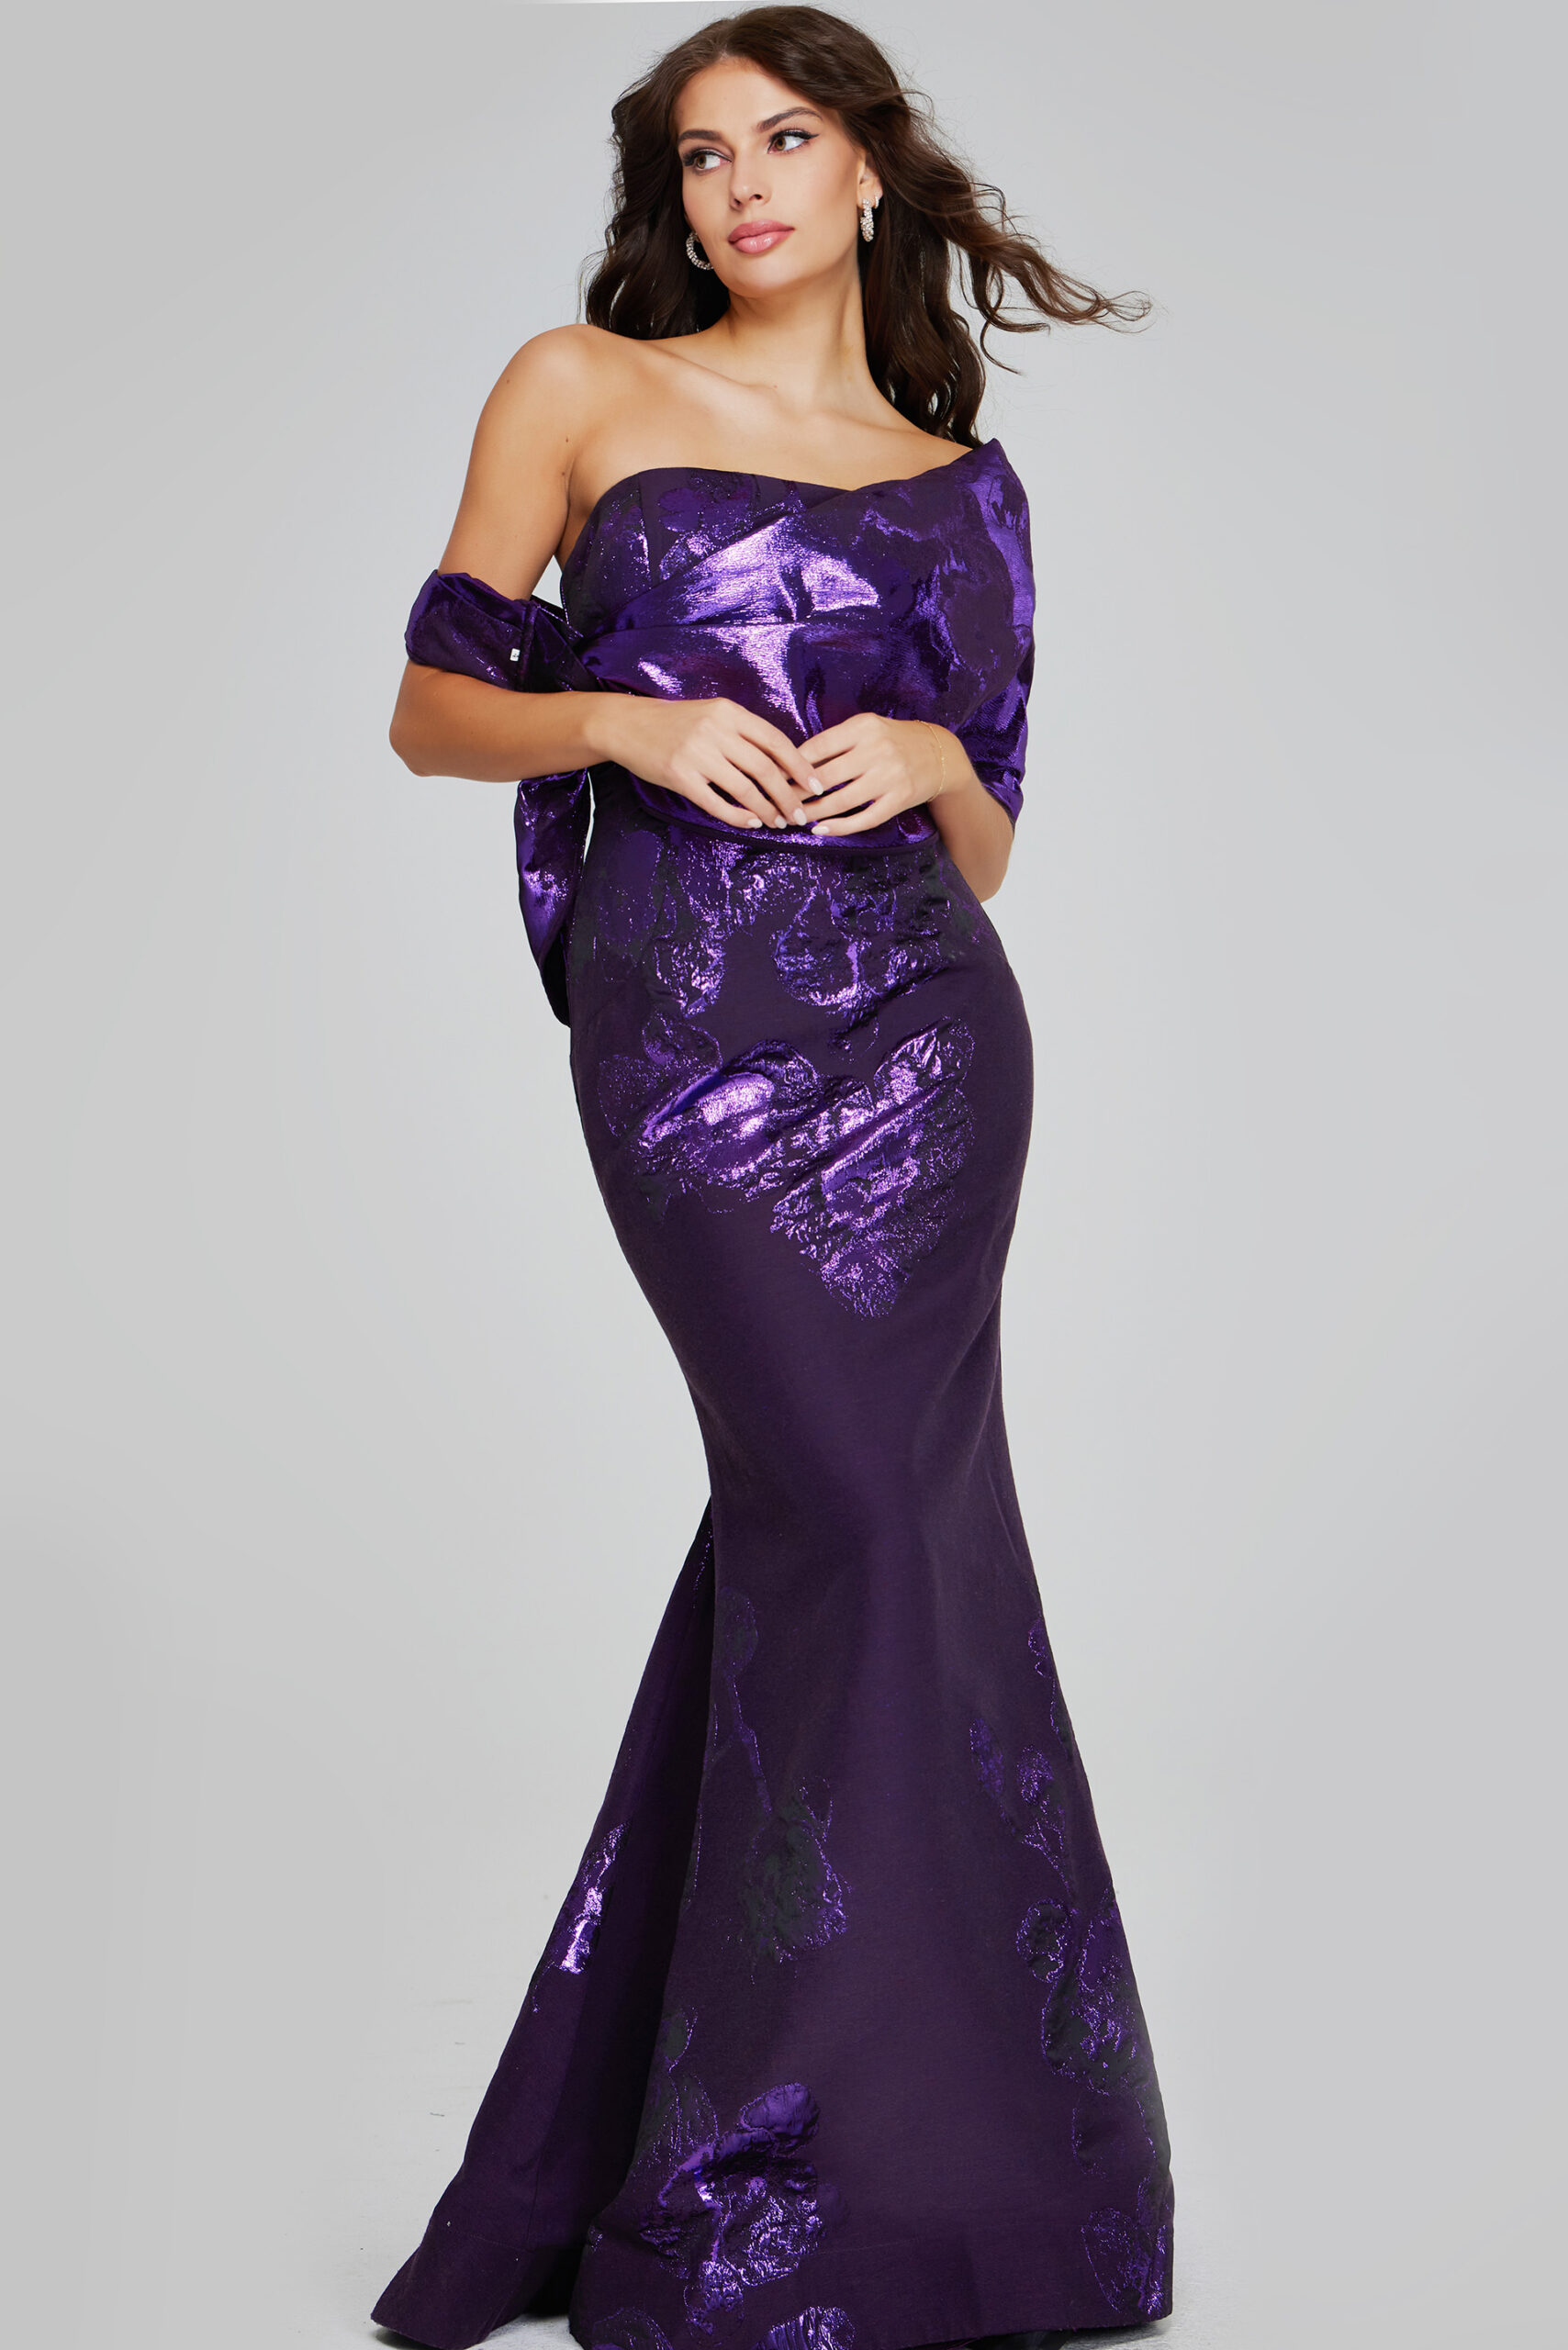 Model wearing Elegant Purple Strapless Gown with Shimmering Floral Pattern 40318